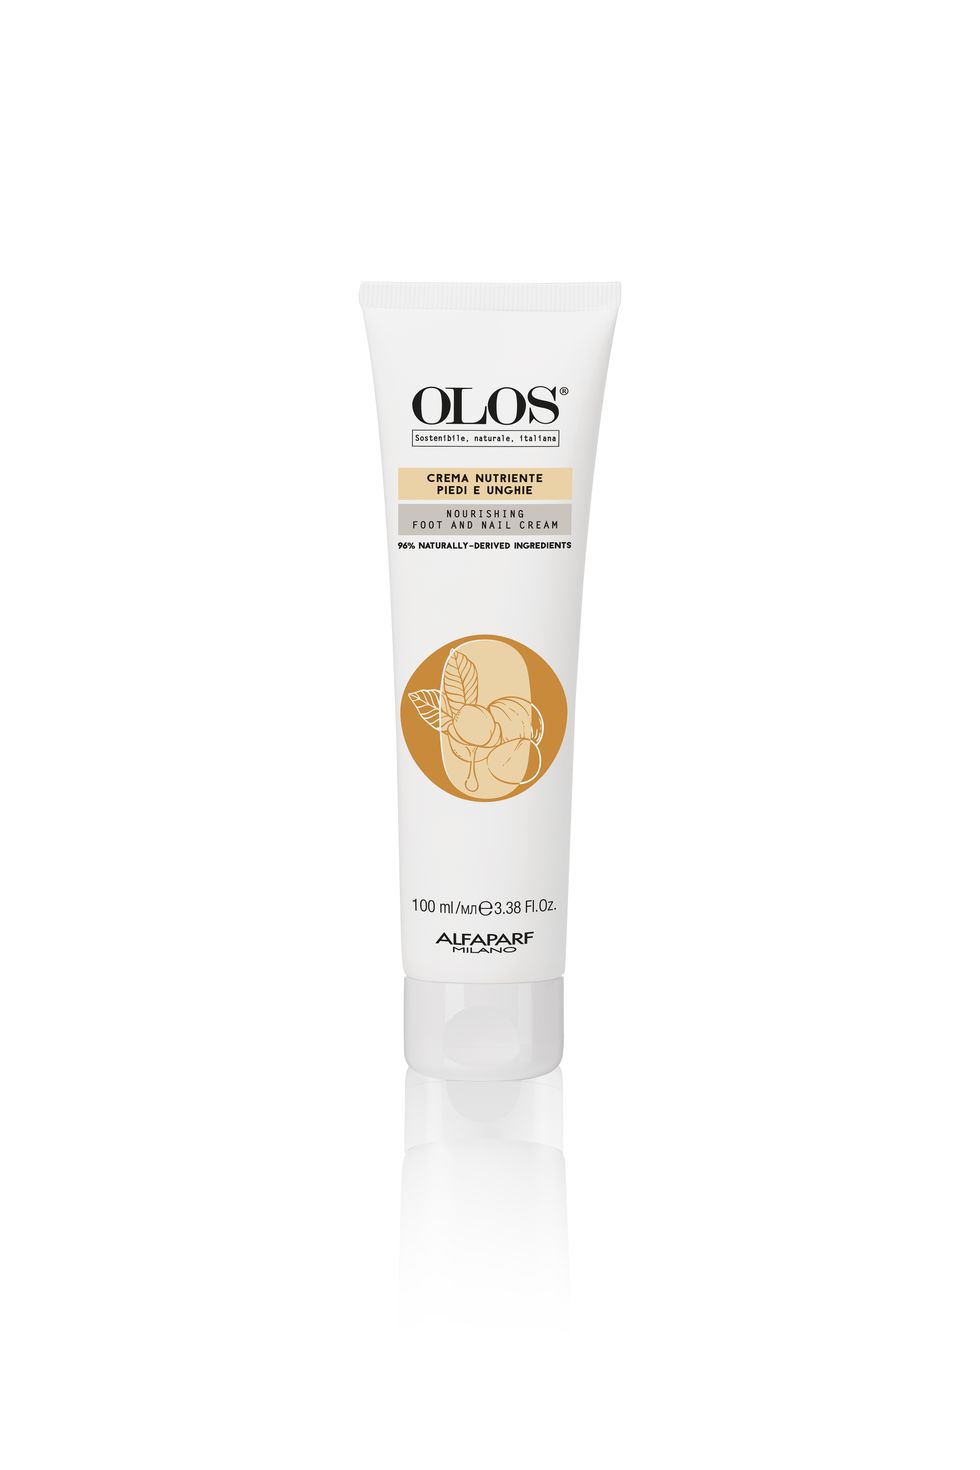 Nourishing Foot and Nail Cream by Olos